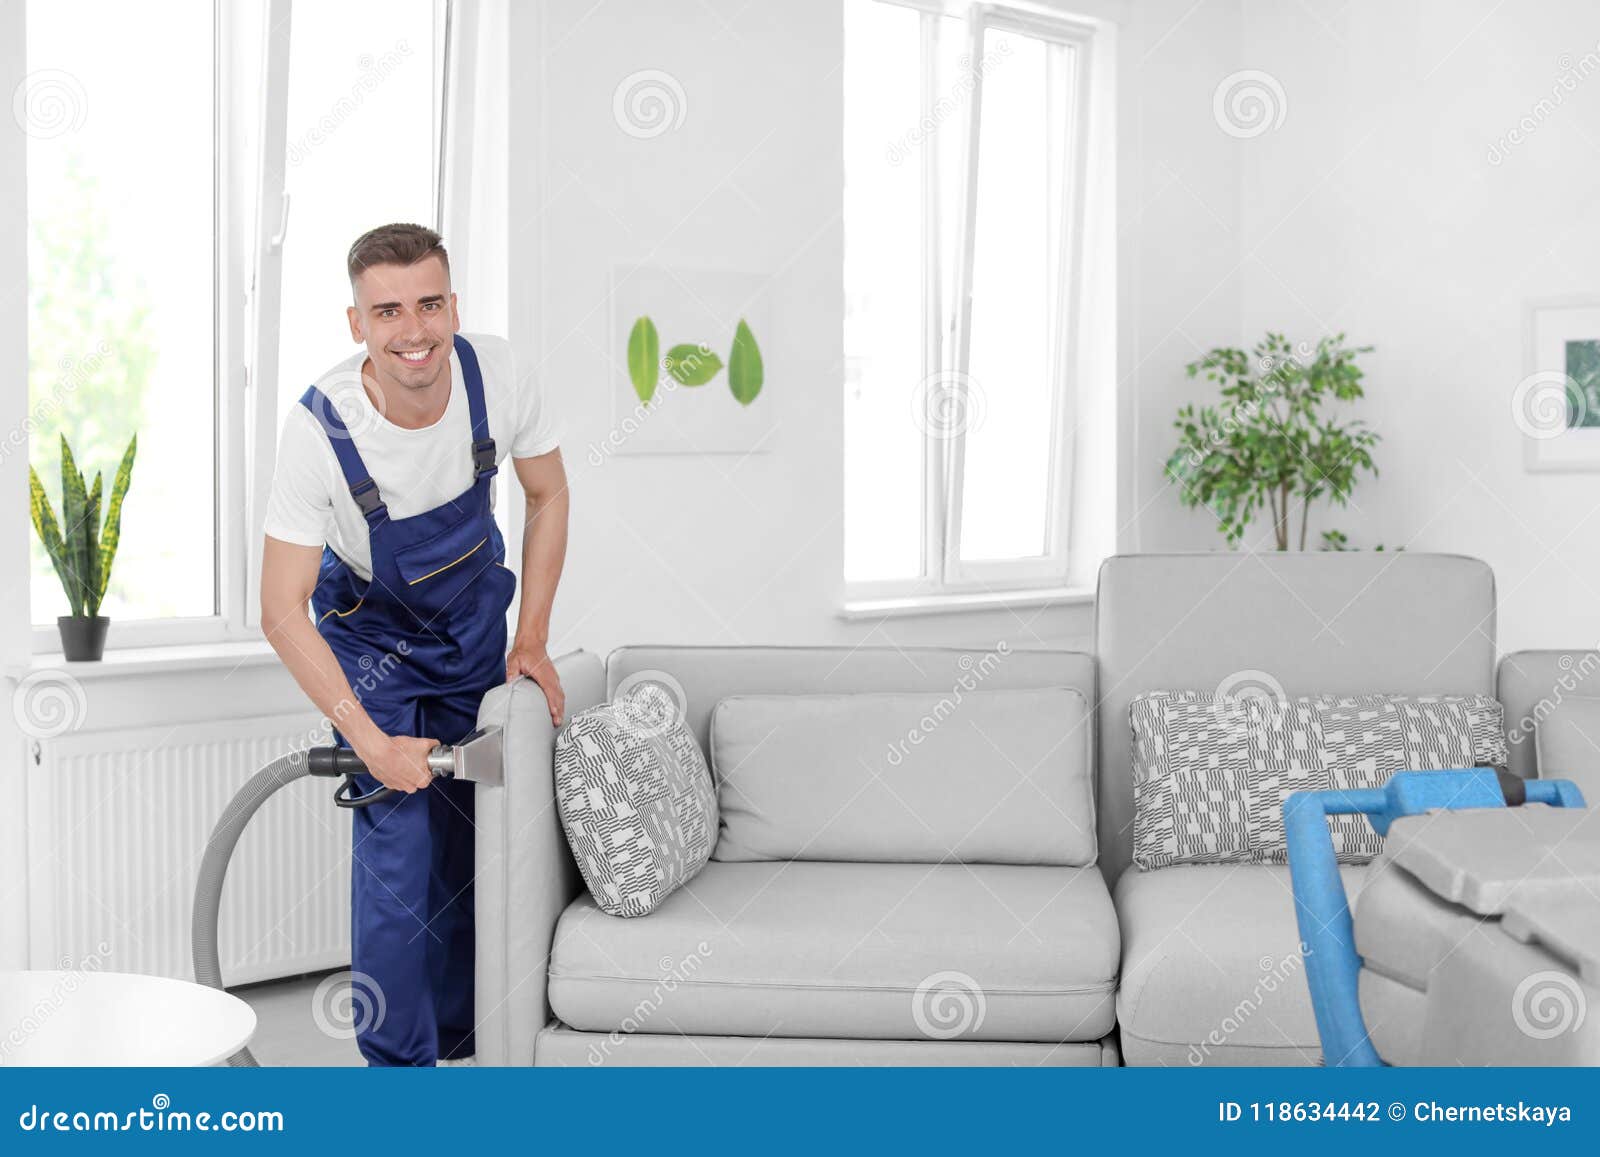 Komkommer Onderzoek Hick Dry Cleaning Worker Removing Dirt from Sofa Stock Photo - Image of  chemical, hygiene: 118634442